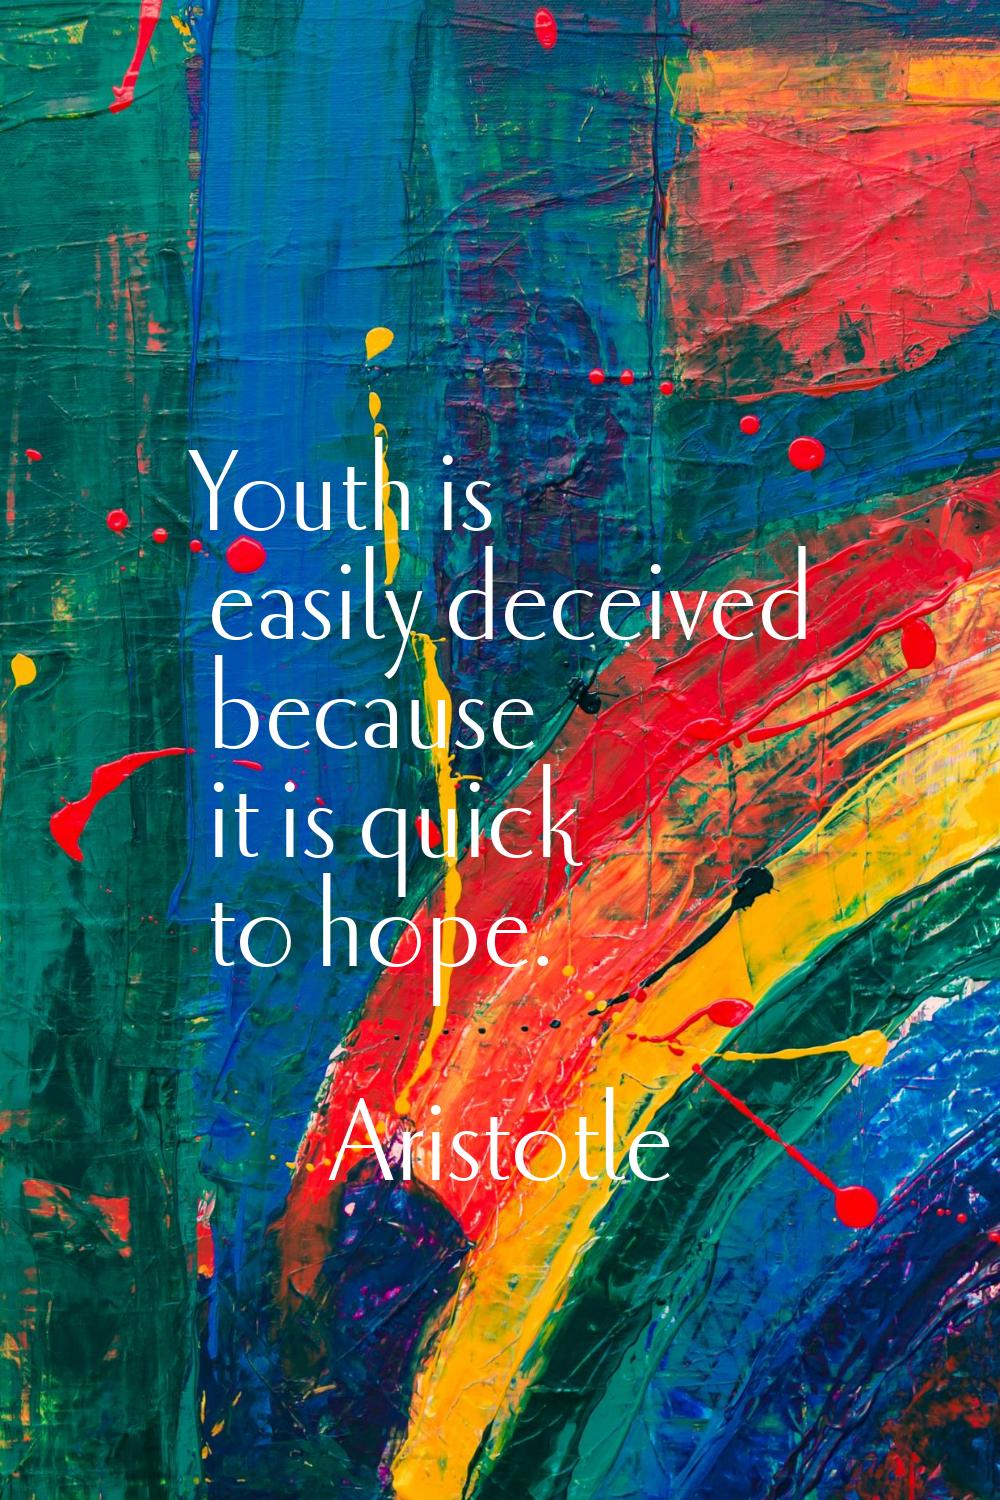 Youth is easily deceived because it is quick to hope.